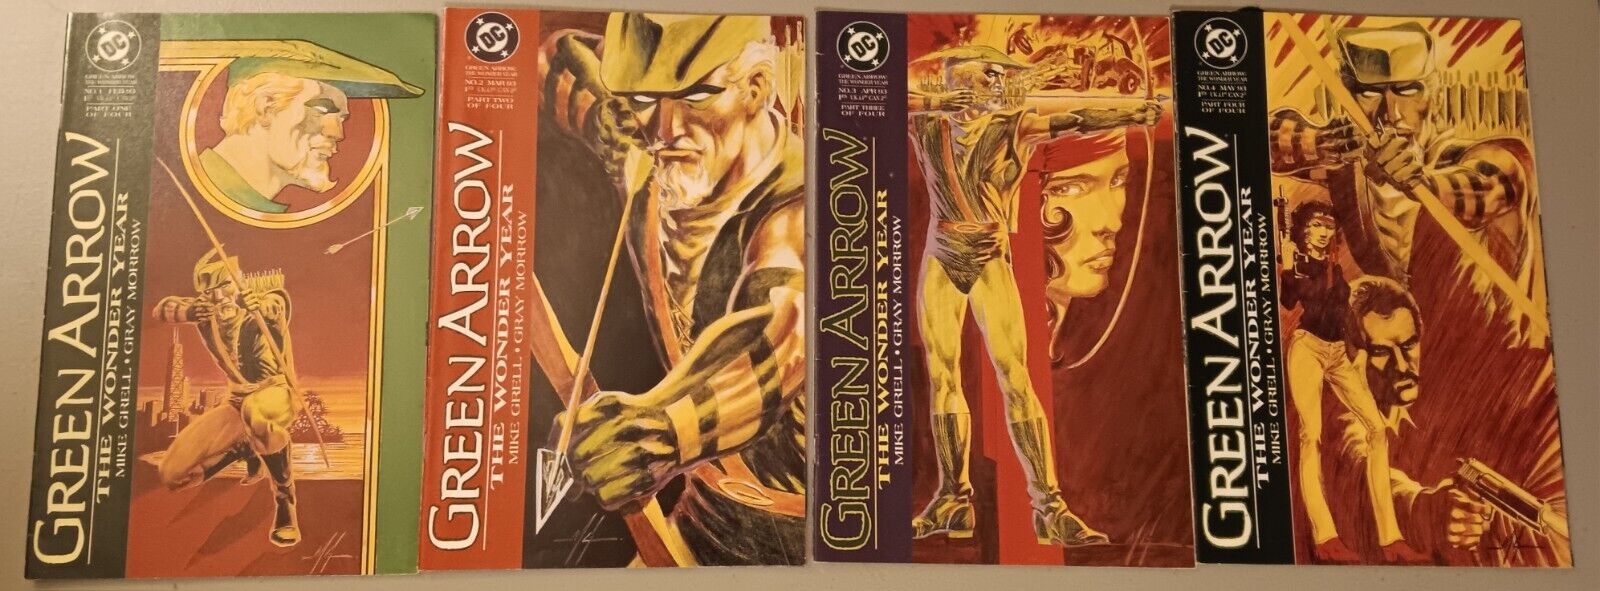 Green Arrow: The Wonder Years #1-4 Complete Story - 1993 Very Good Condtion